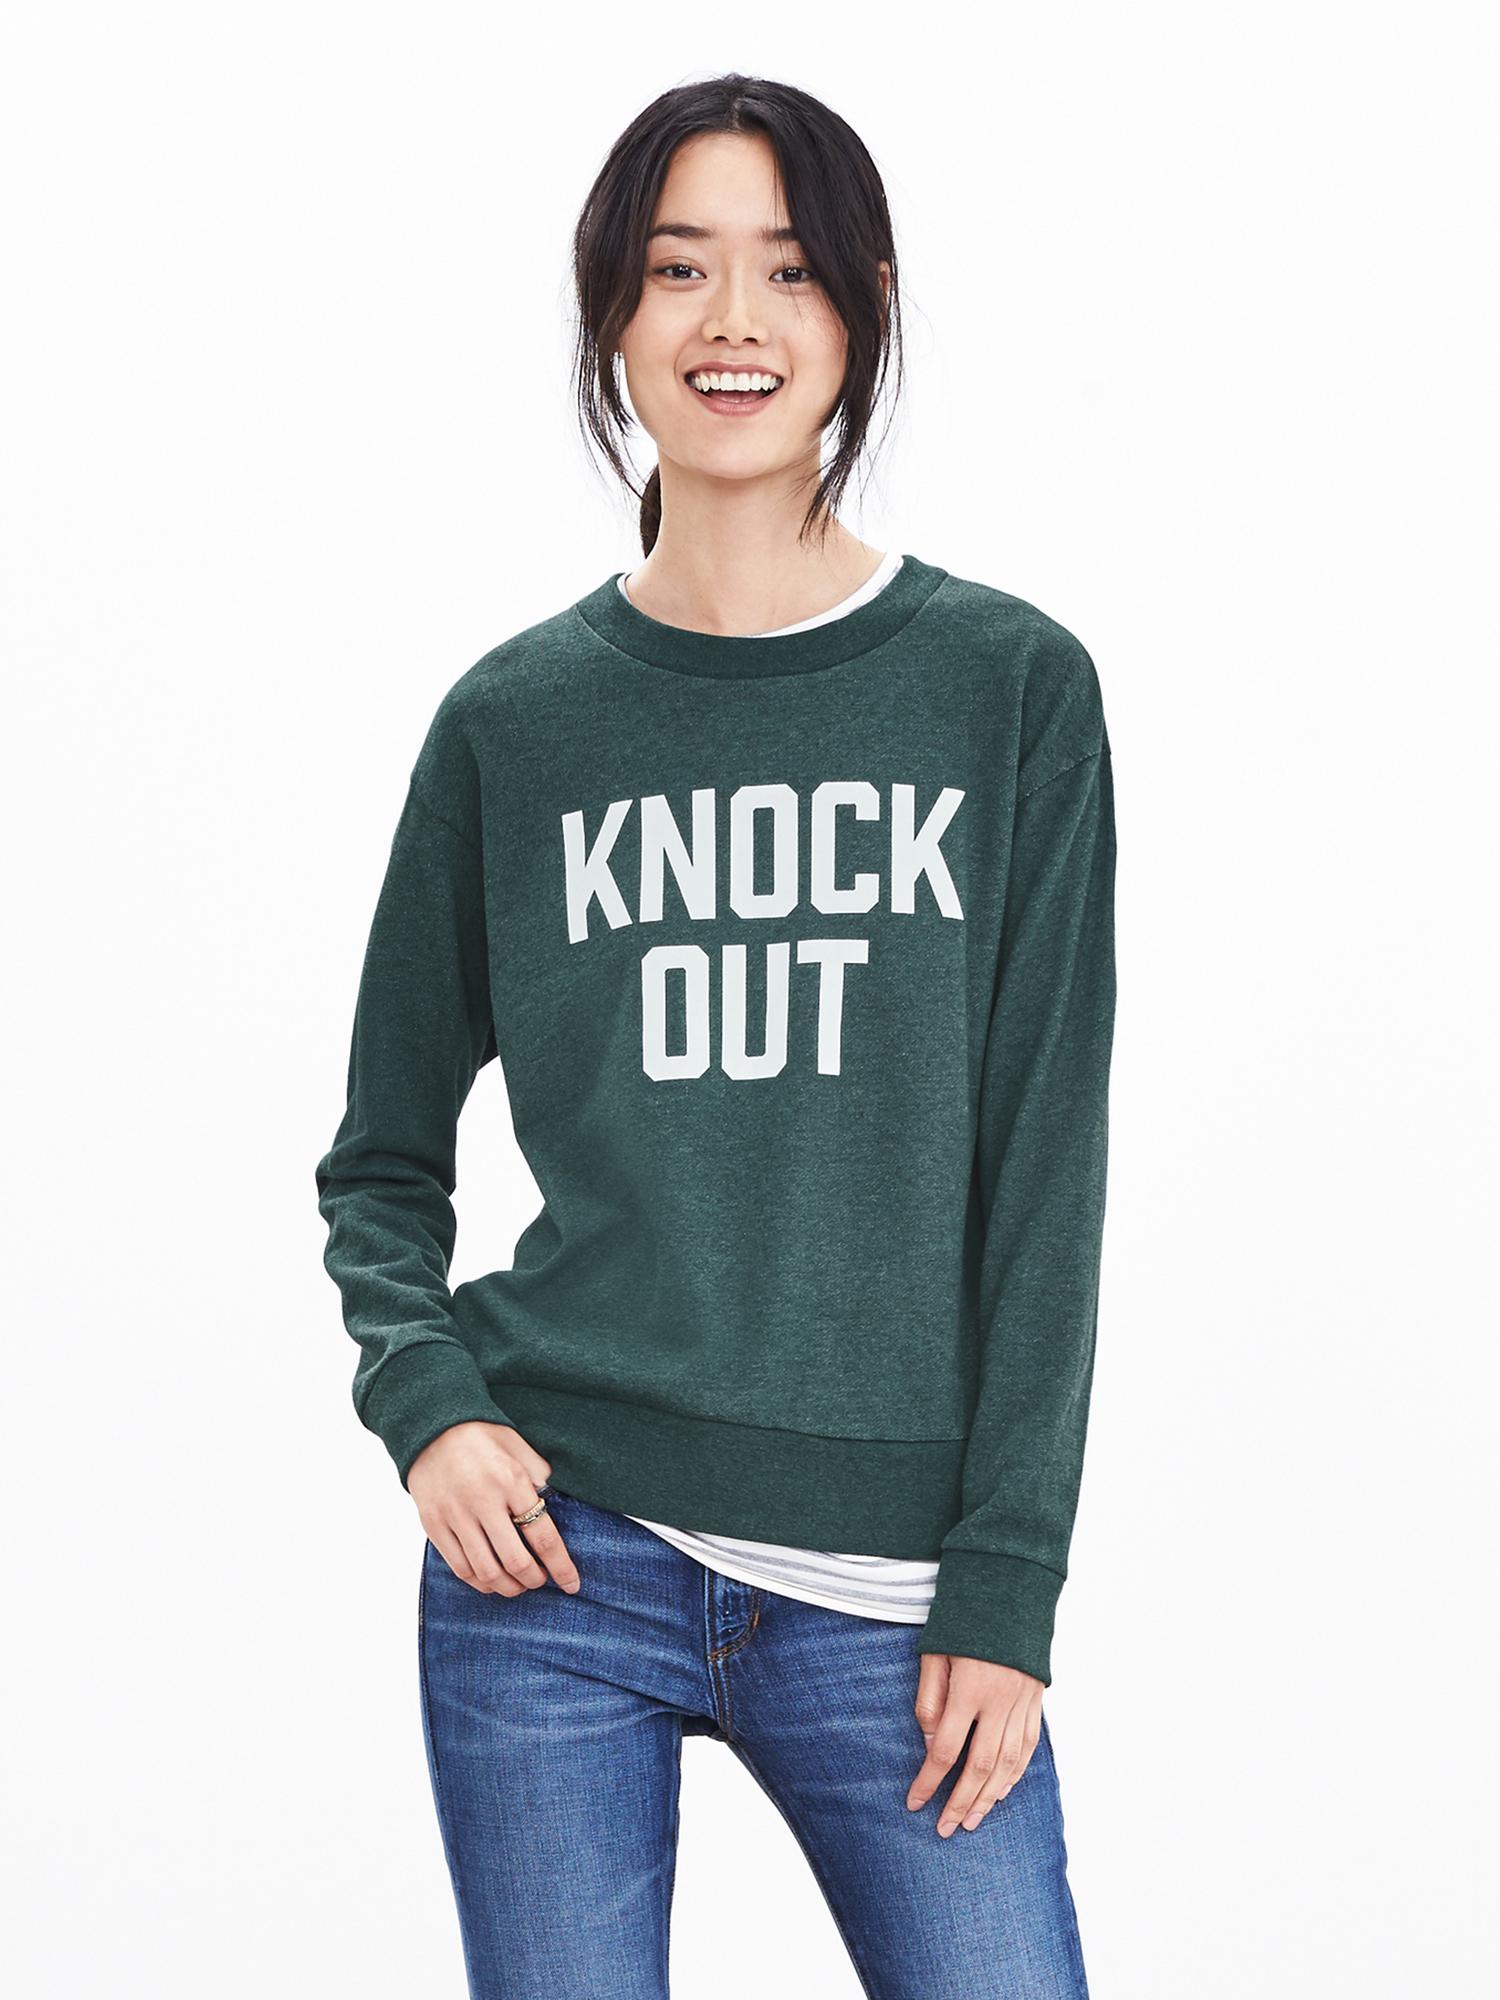 "Knock Out" Graphic Sweatshirt